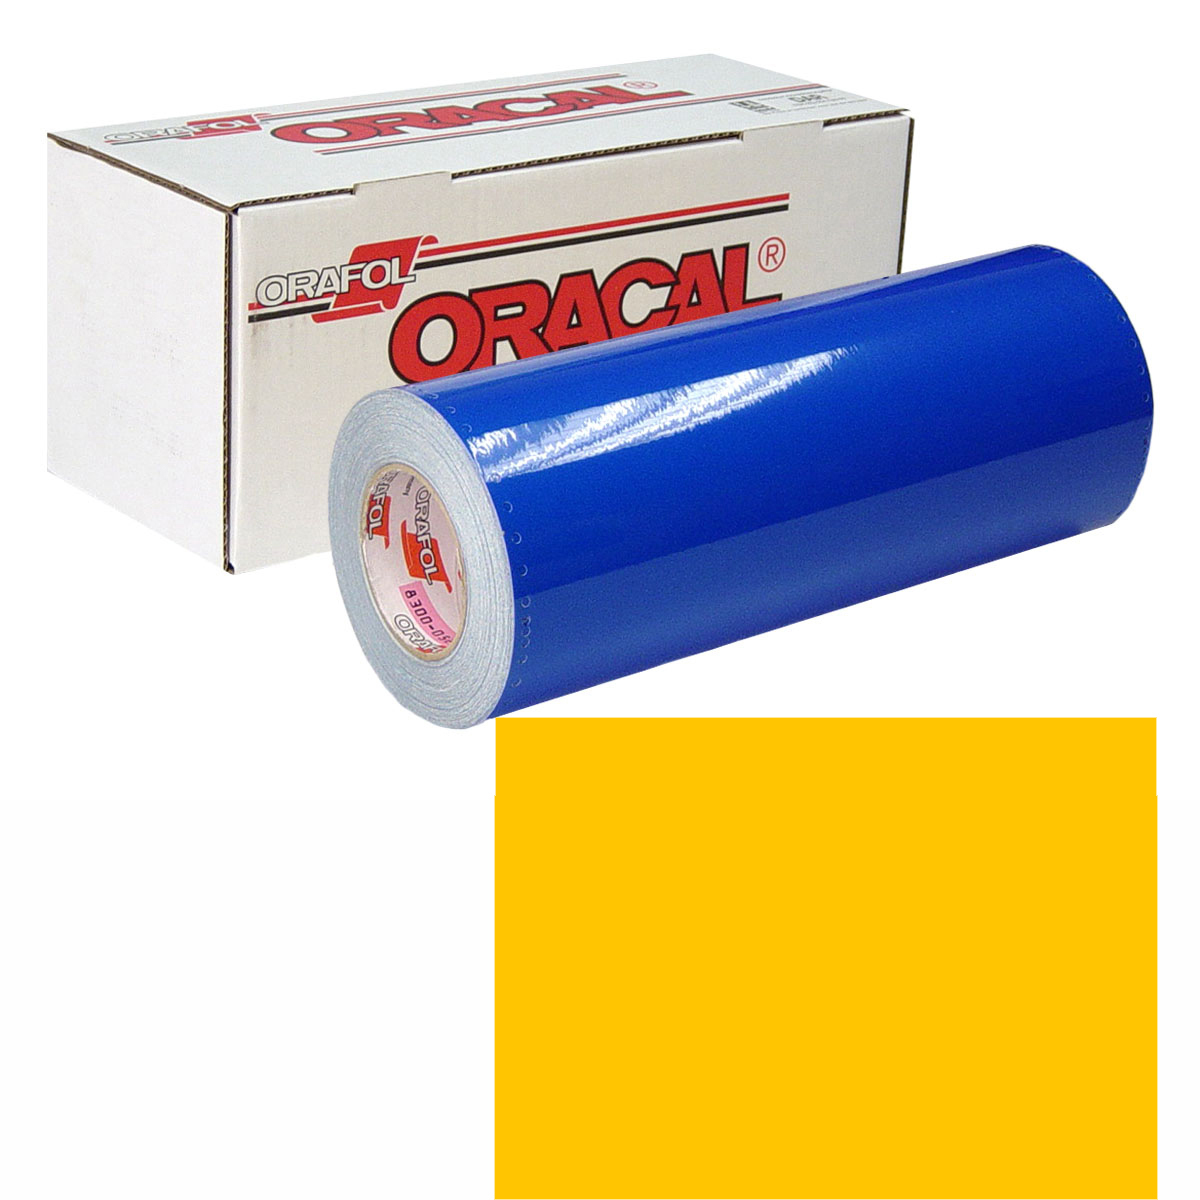 ORACAL 631 30in X 10yd 021 Yellow